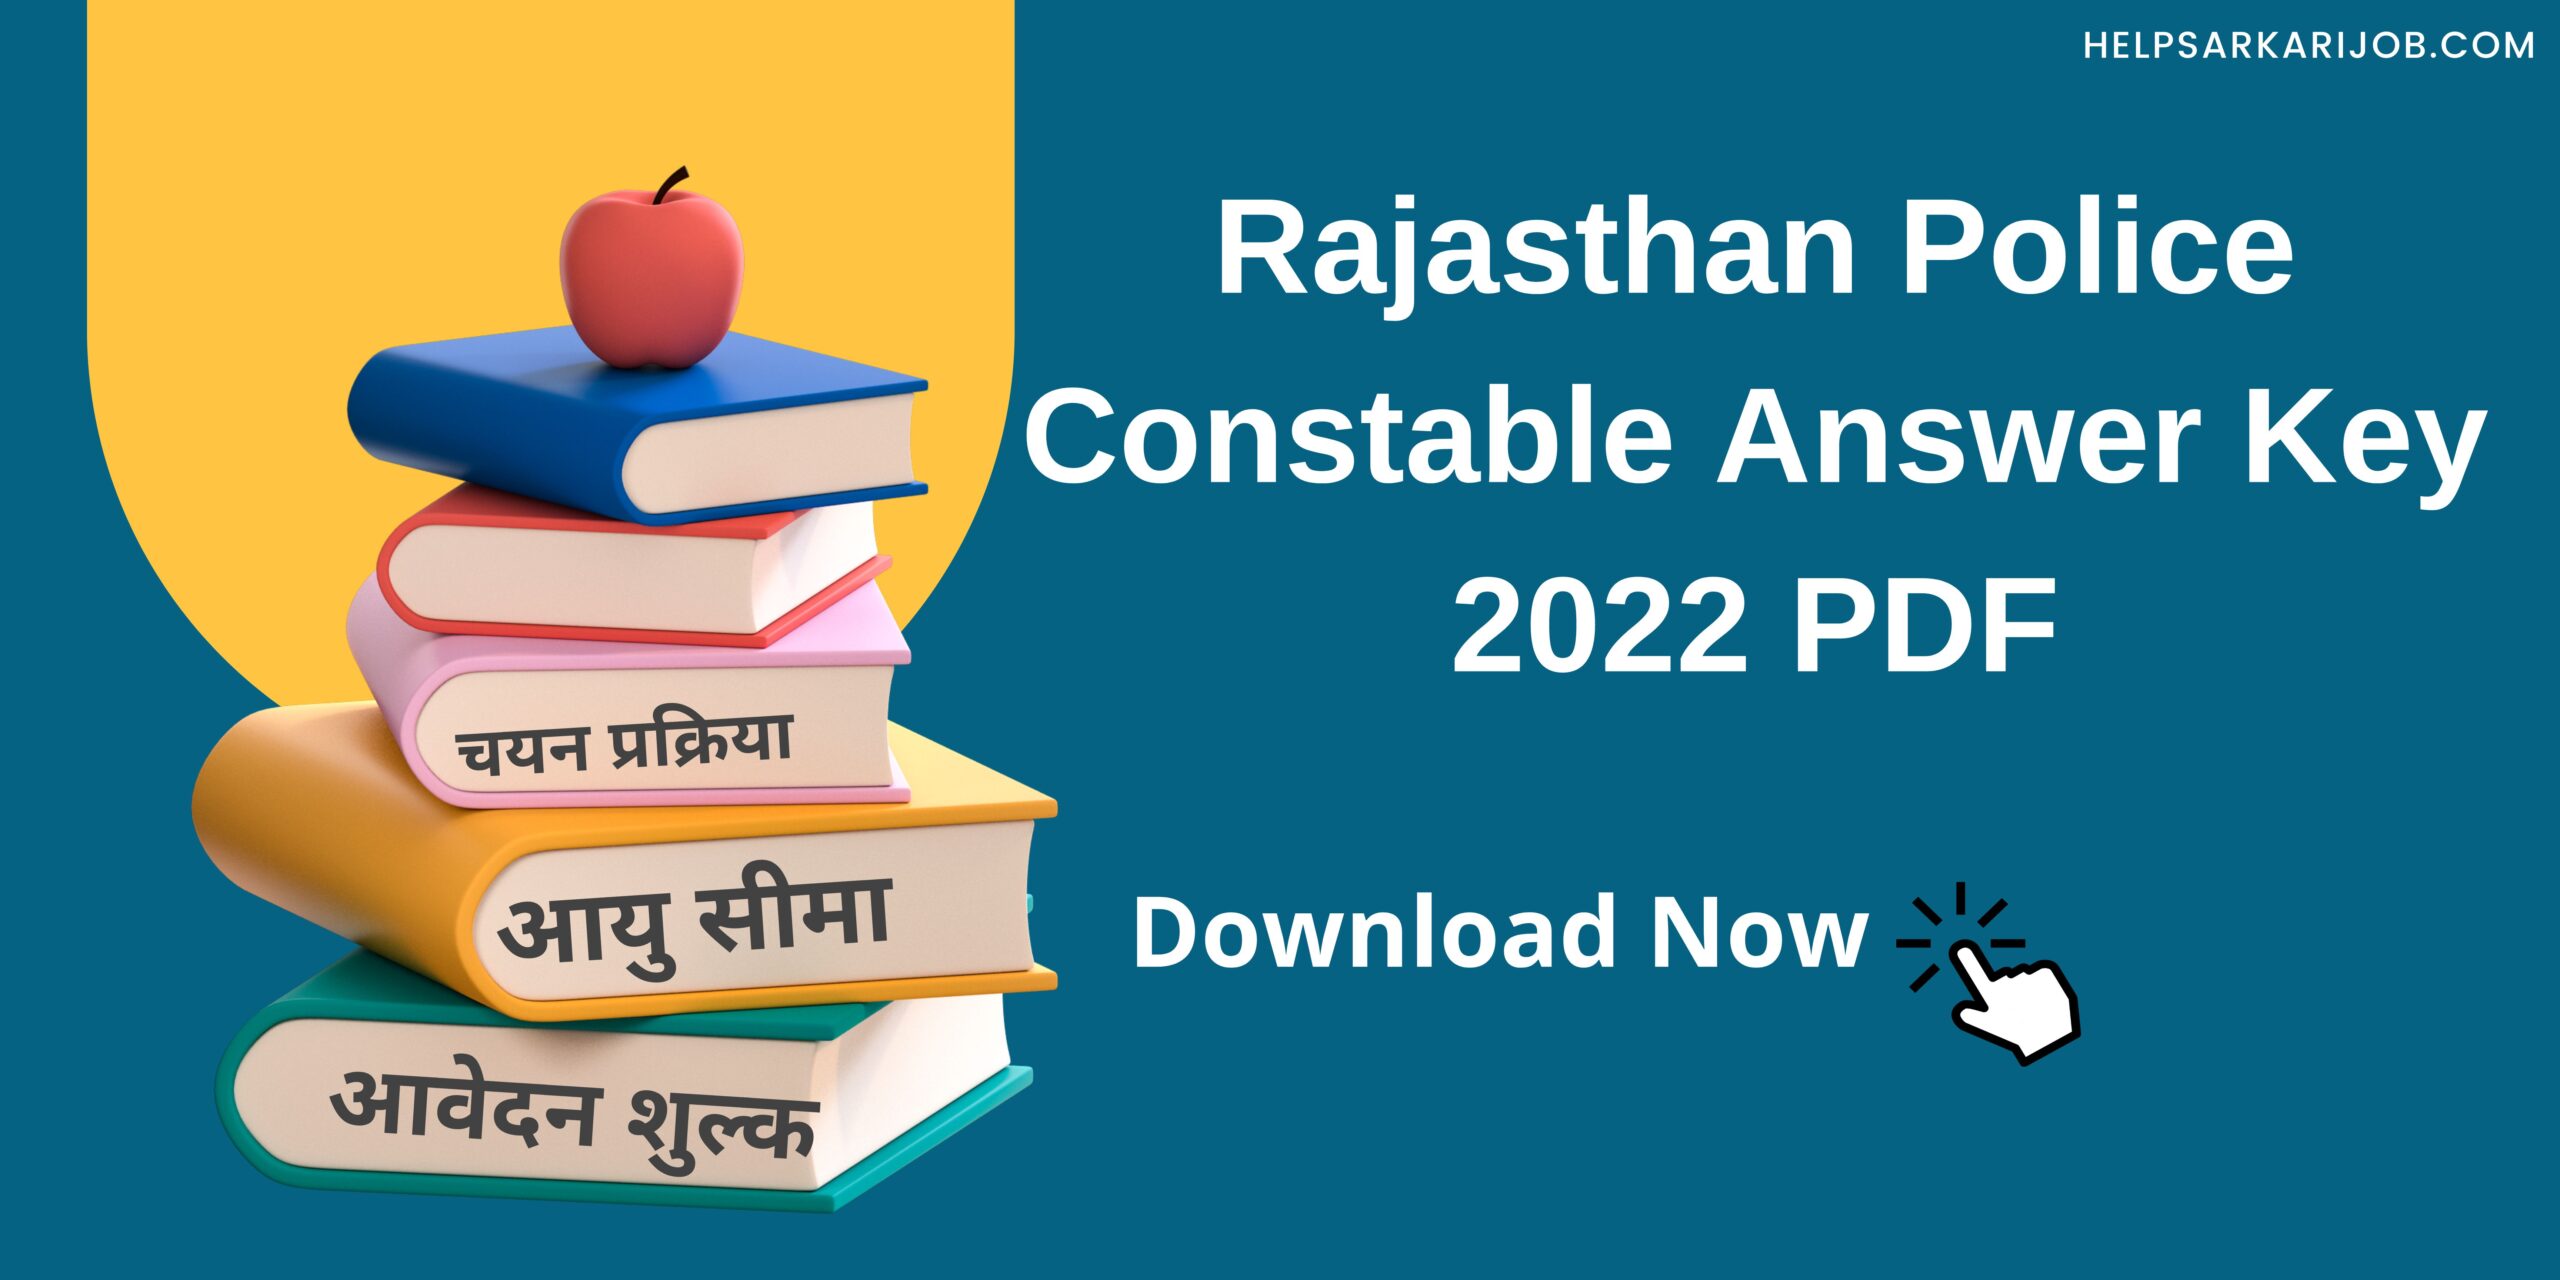 Rajasthan Police Constable Answer Key 2022 PDF